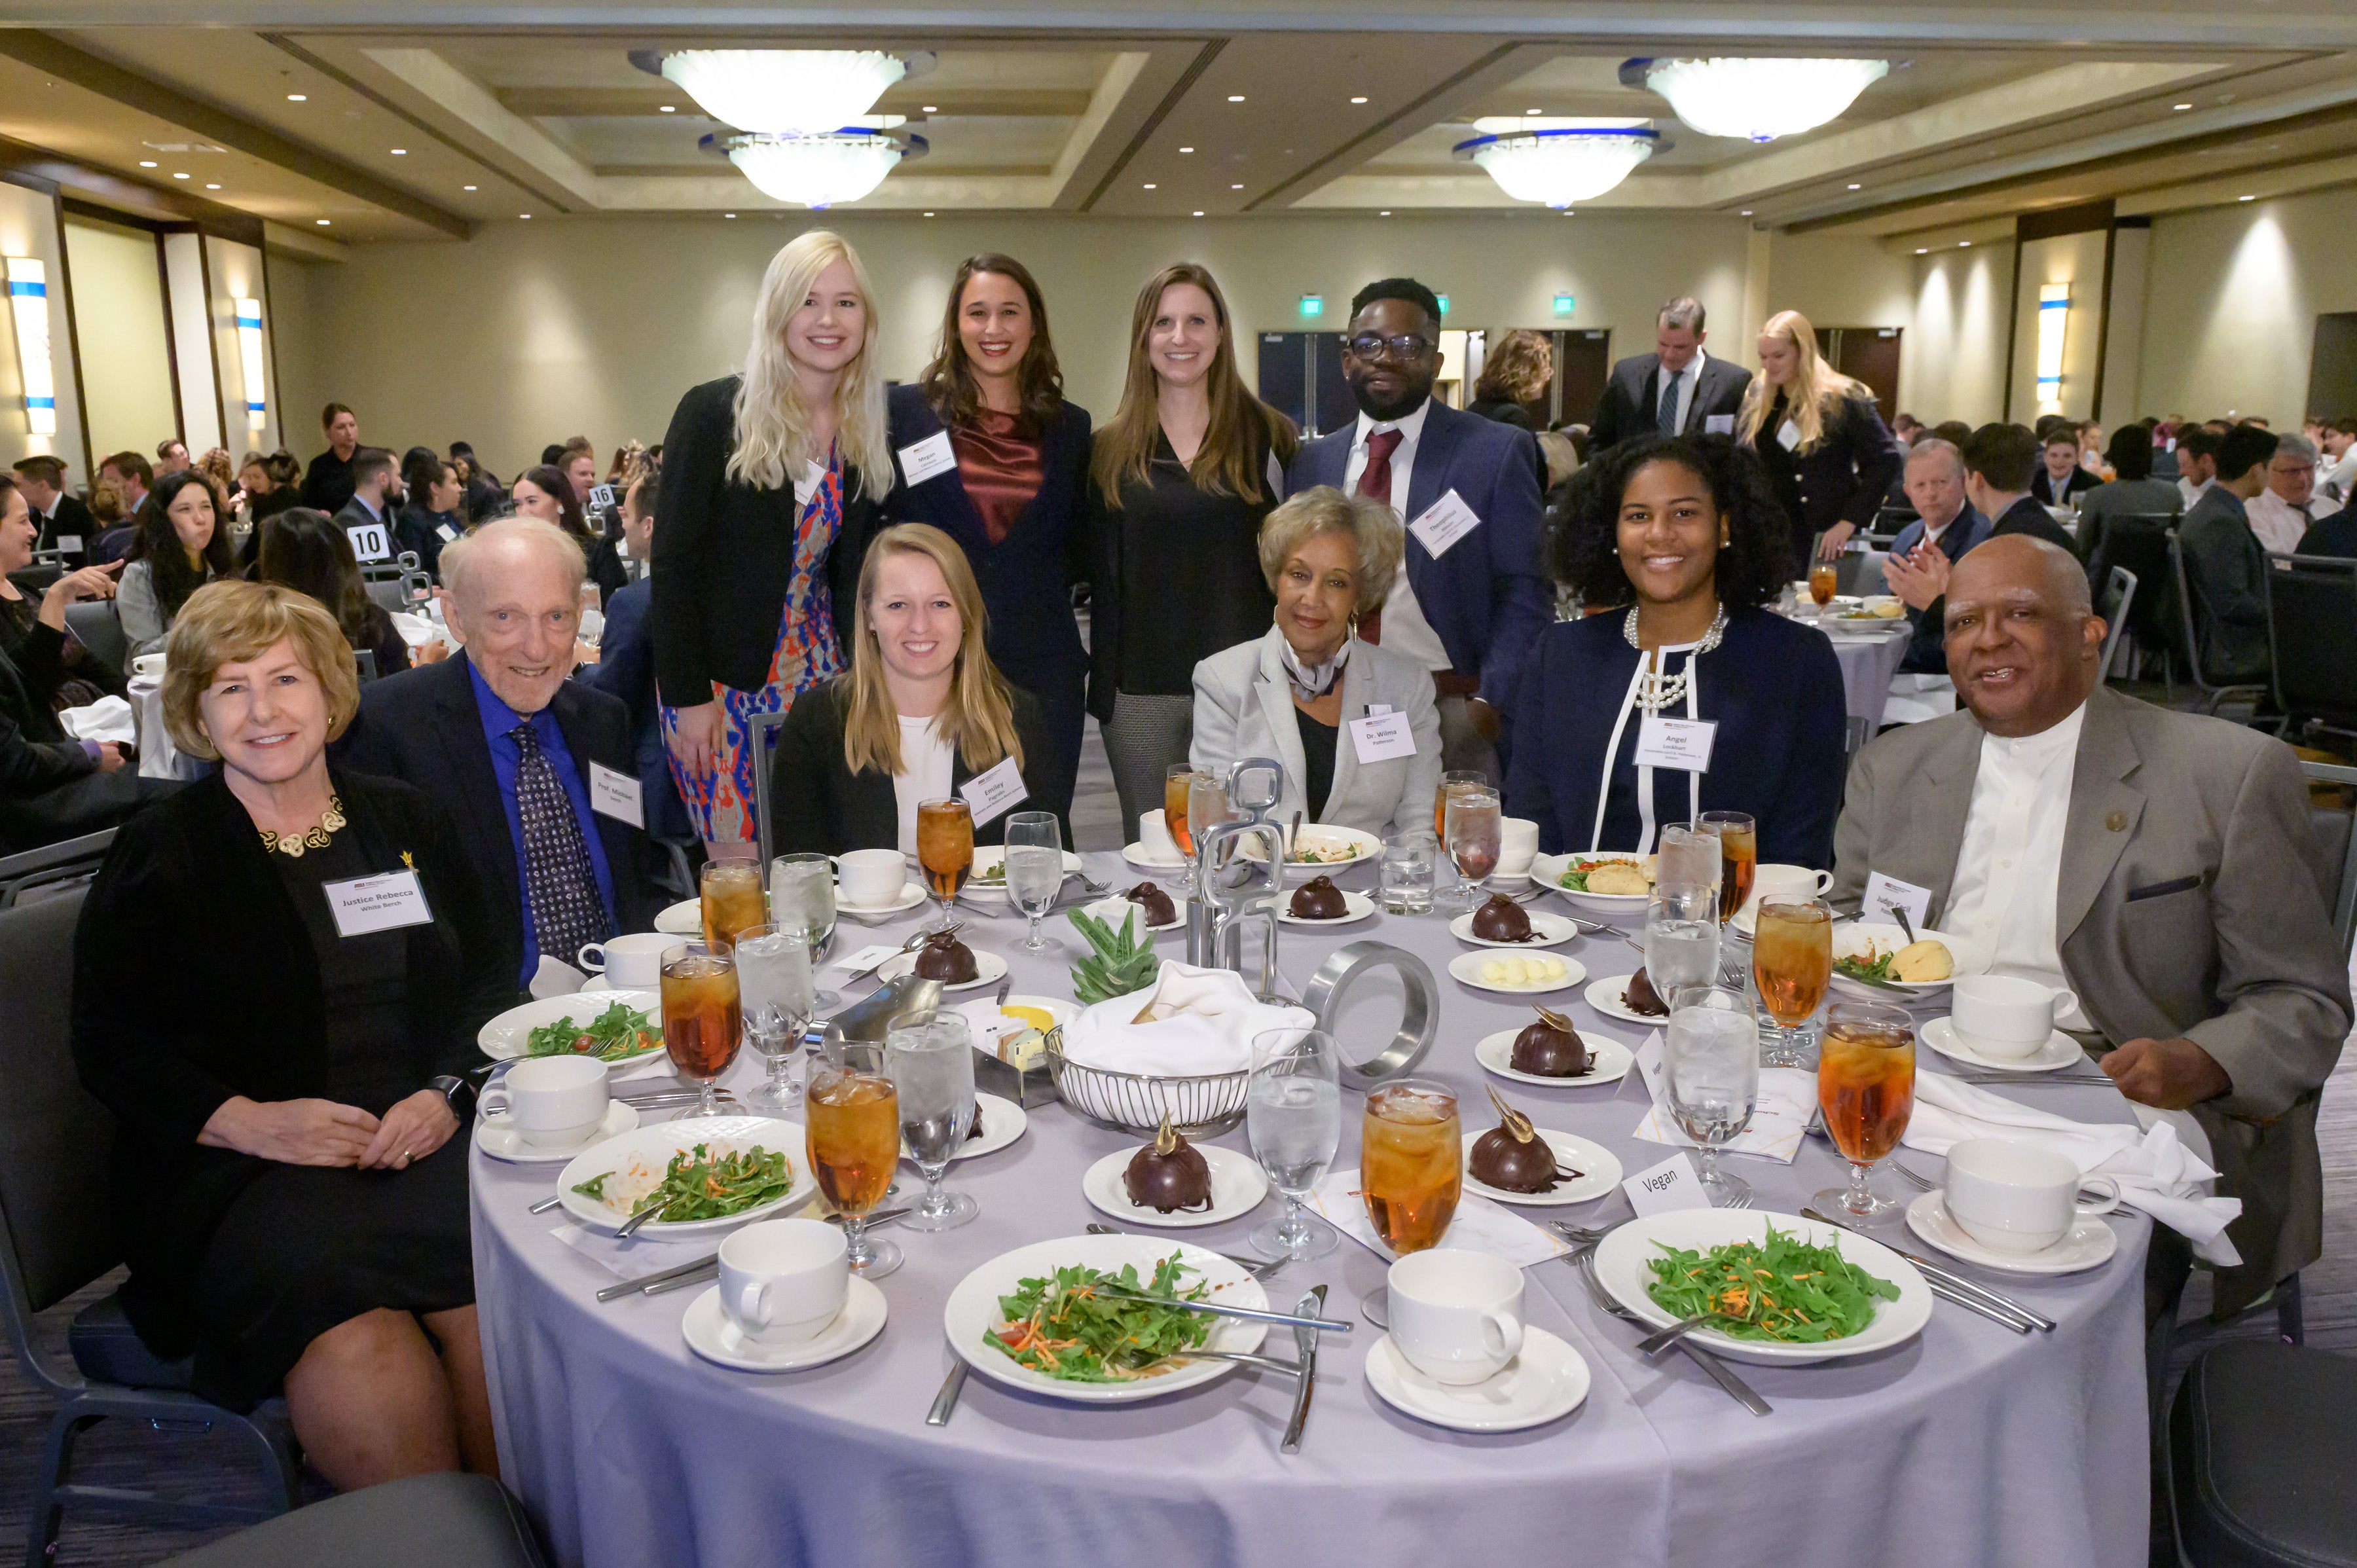 Notable ASU Law Alumni, students, and important ASU Law figures sitting at a table during the Scholarship Luncheon.